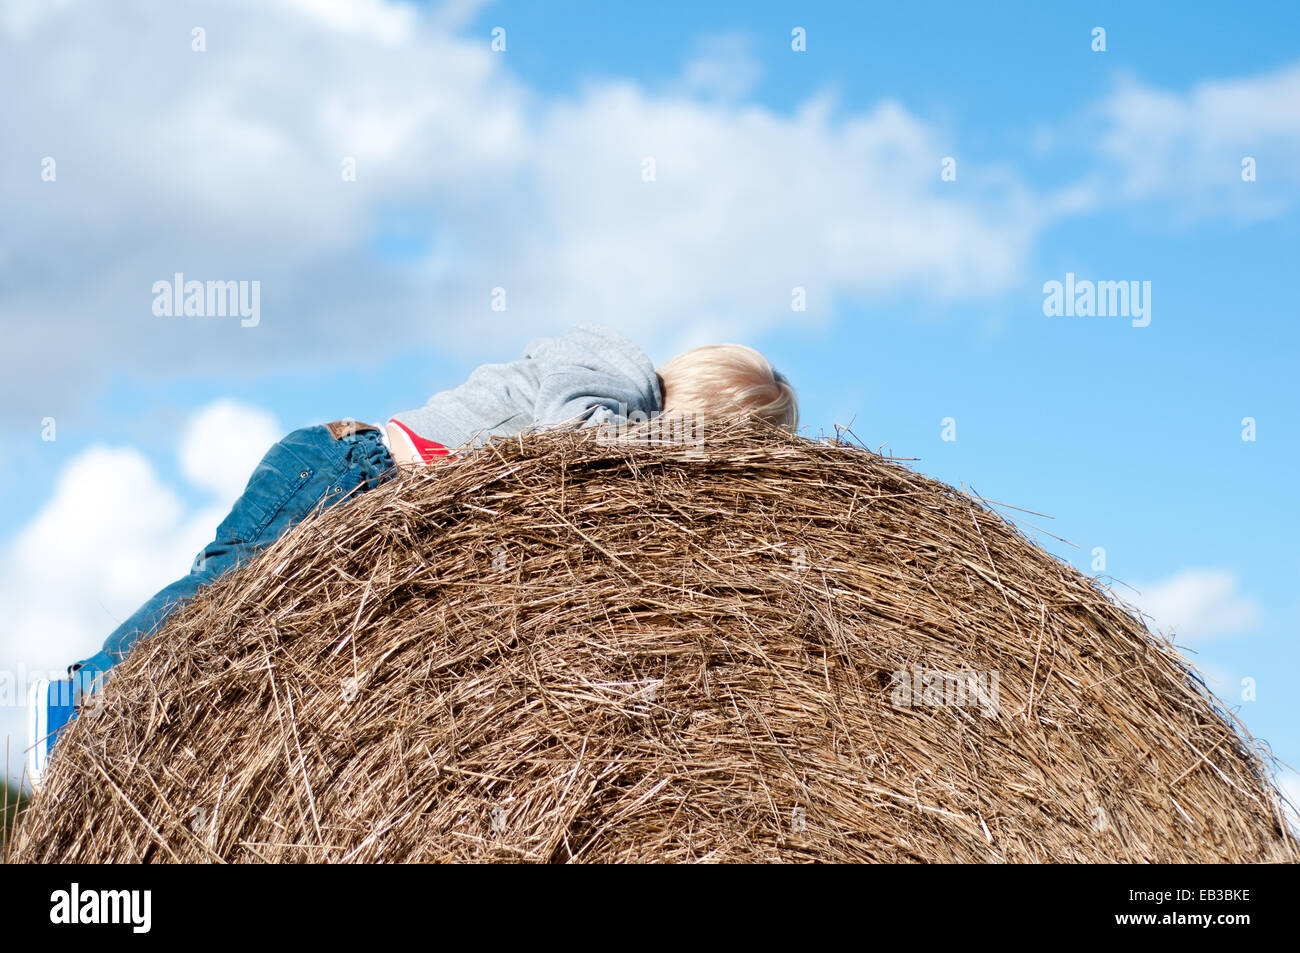 Boy lying on hay bale Banque D'Images